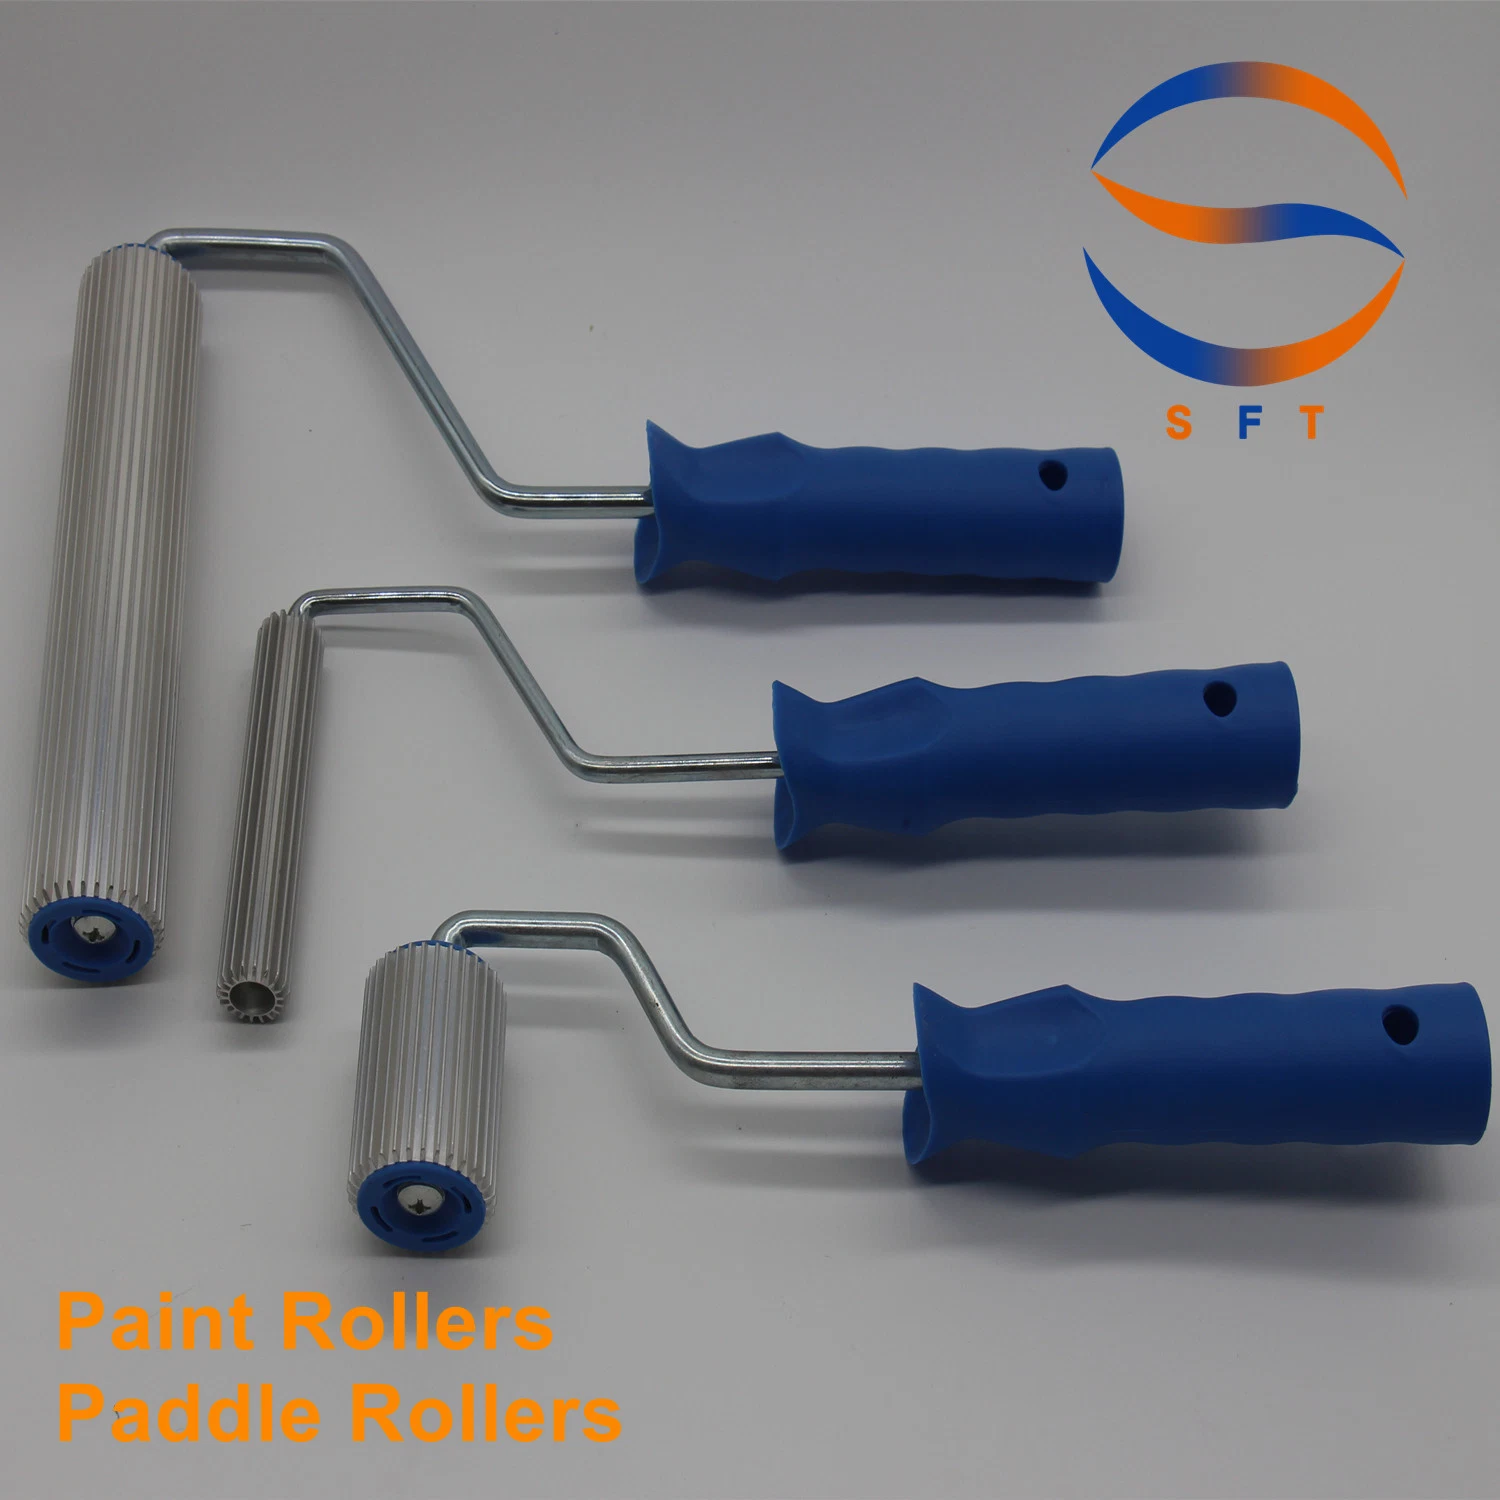 Aluminium Paddle Rollers Paint Rollers for FRP Laminating